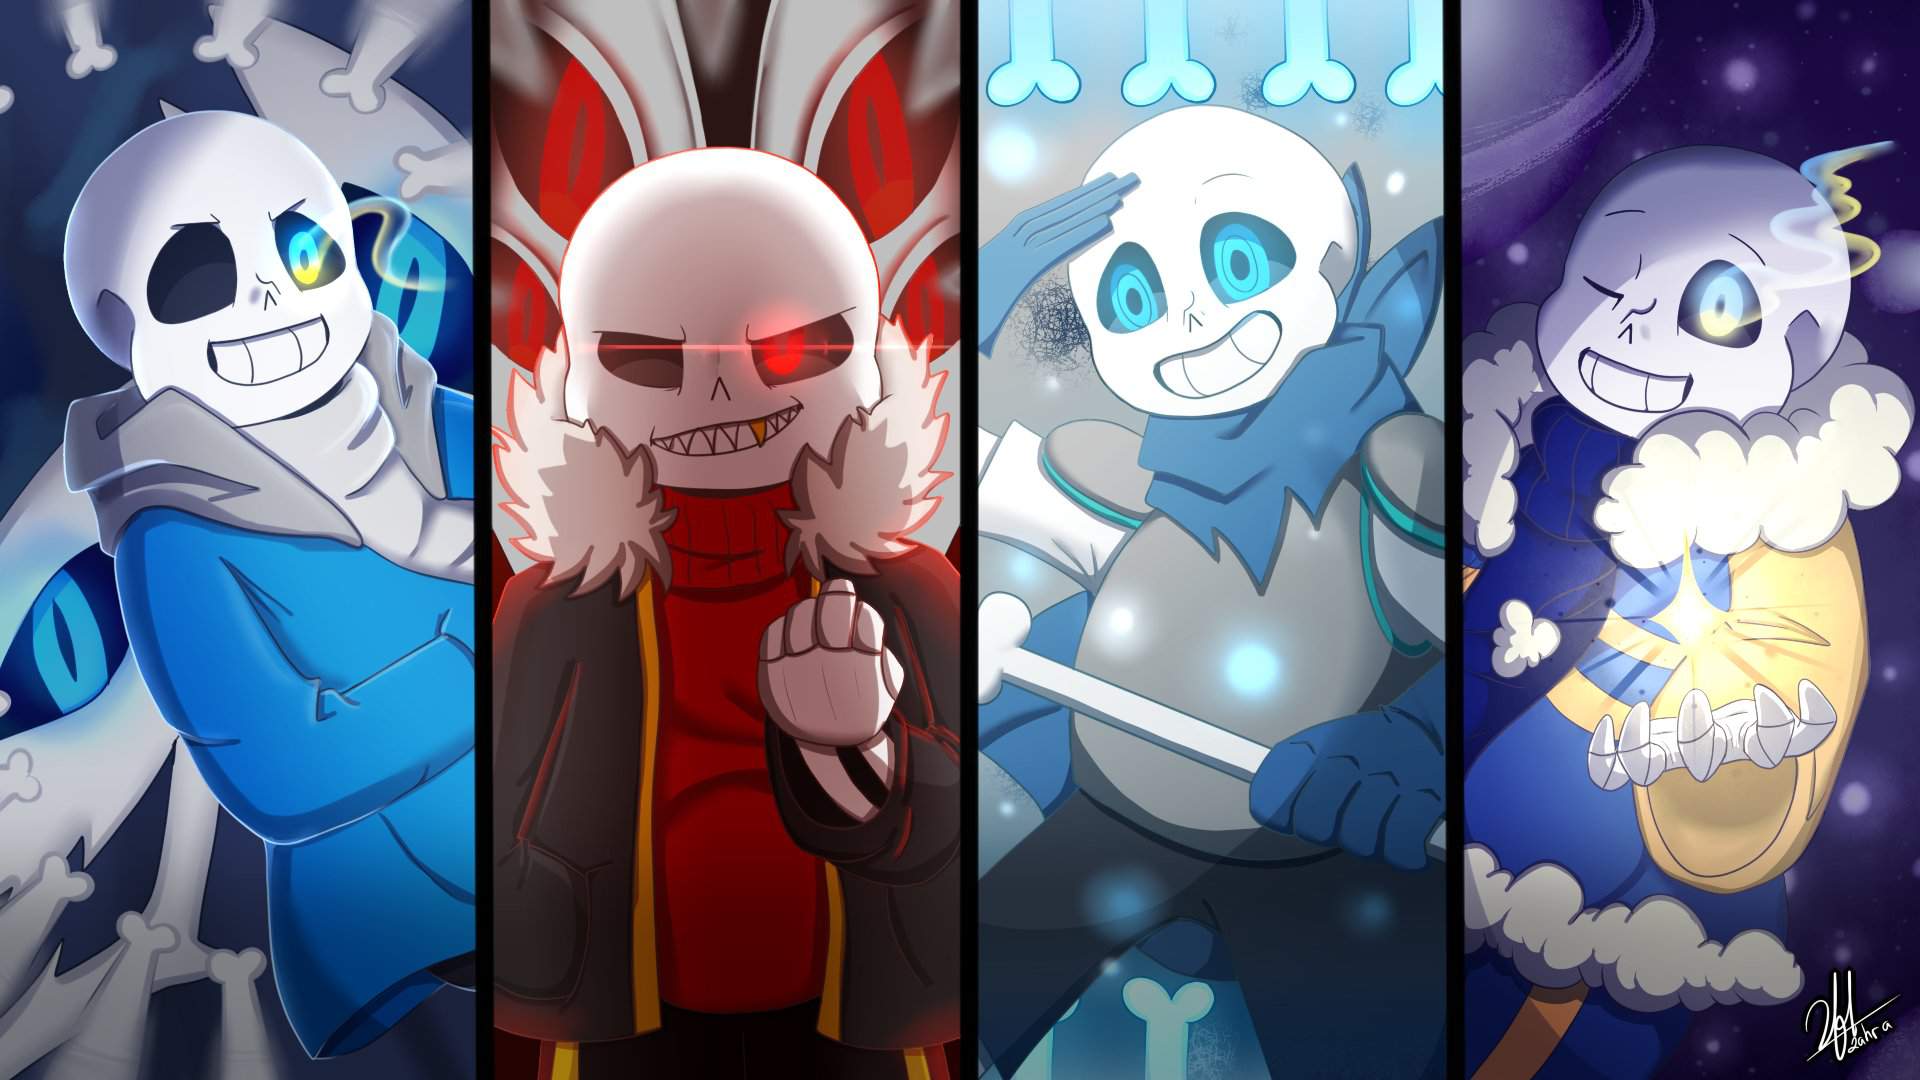 Download Sans and Papyrus beloved brothers from Undertale Wallpaper   Wallpaperscom